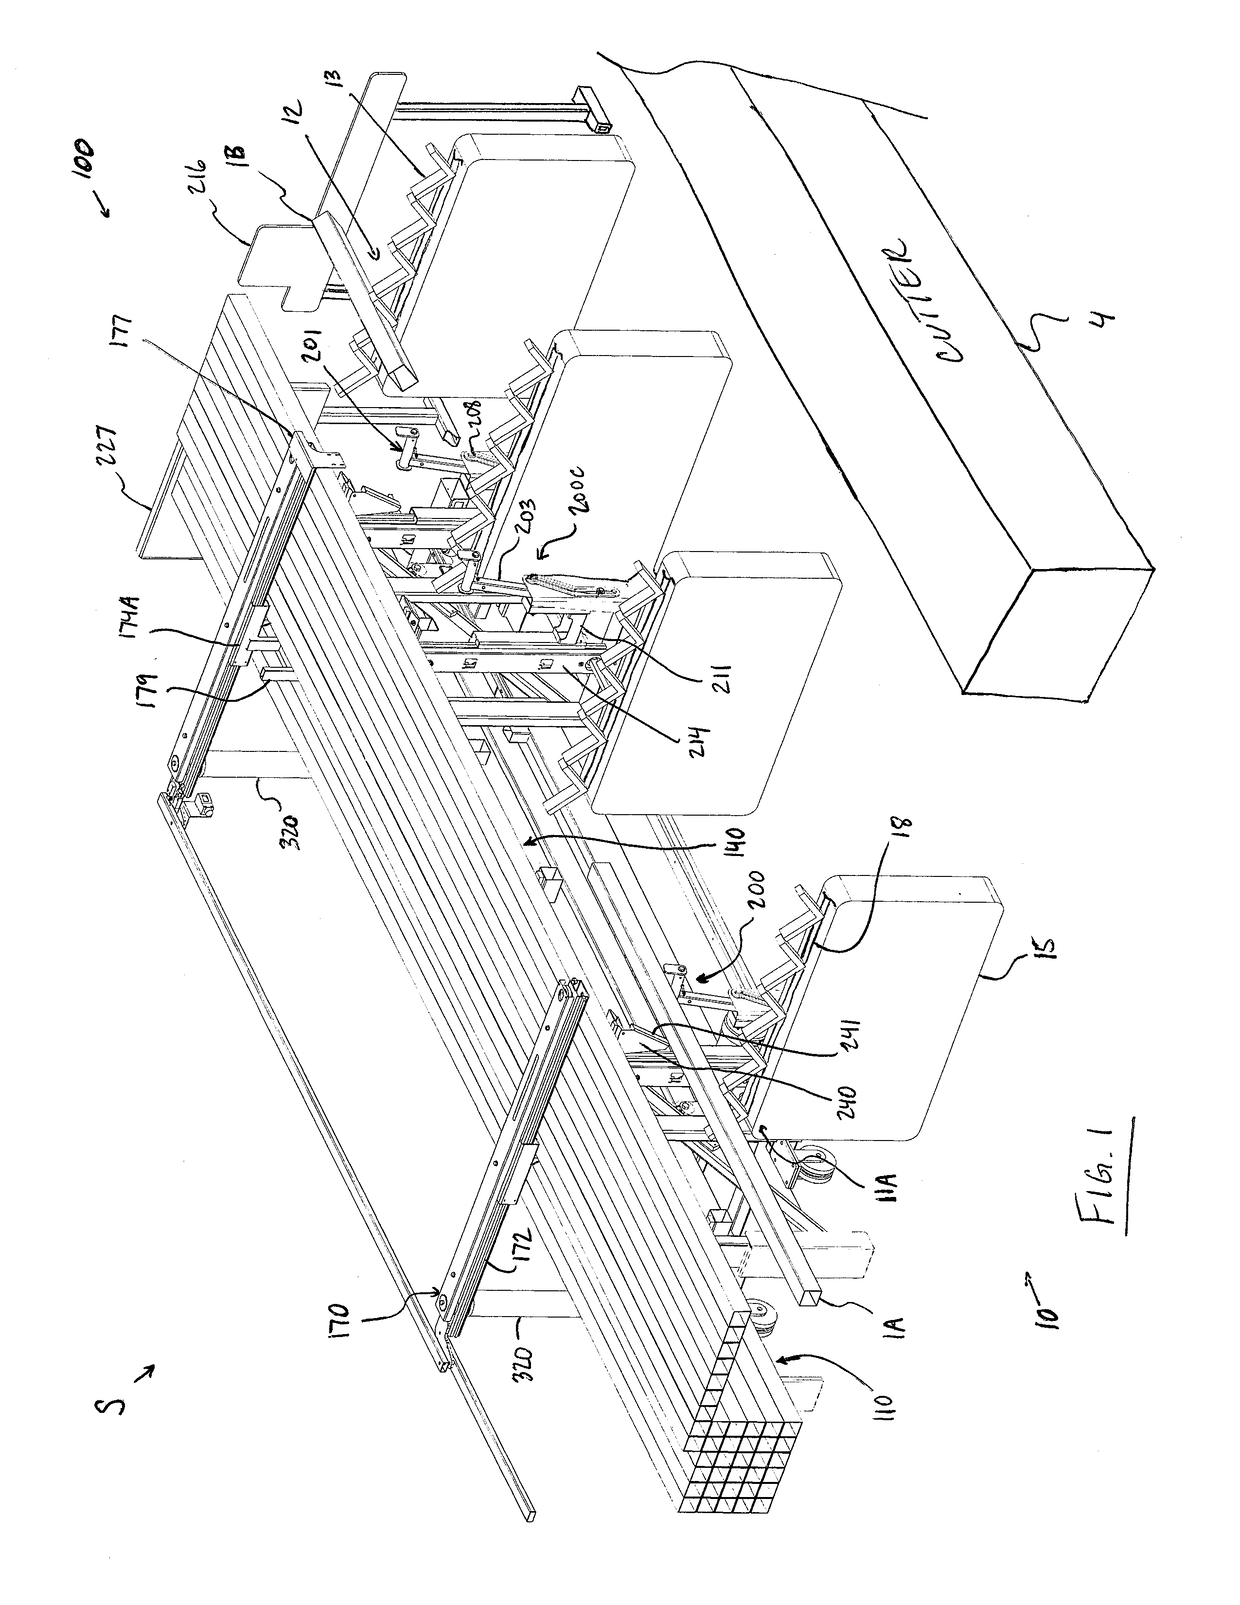 System for Loading Elongated Members Such as Tubes Onto a Conveyor for Later Processing